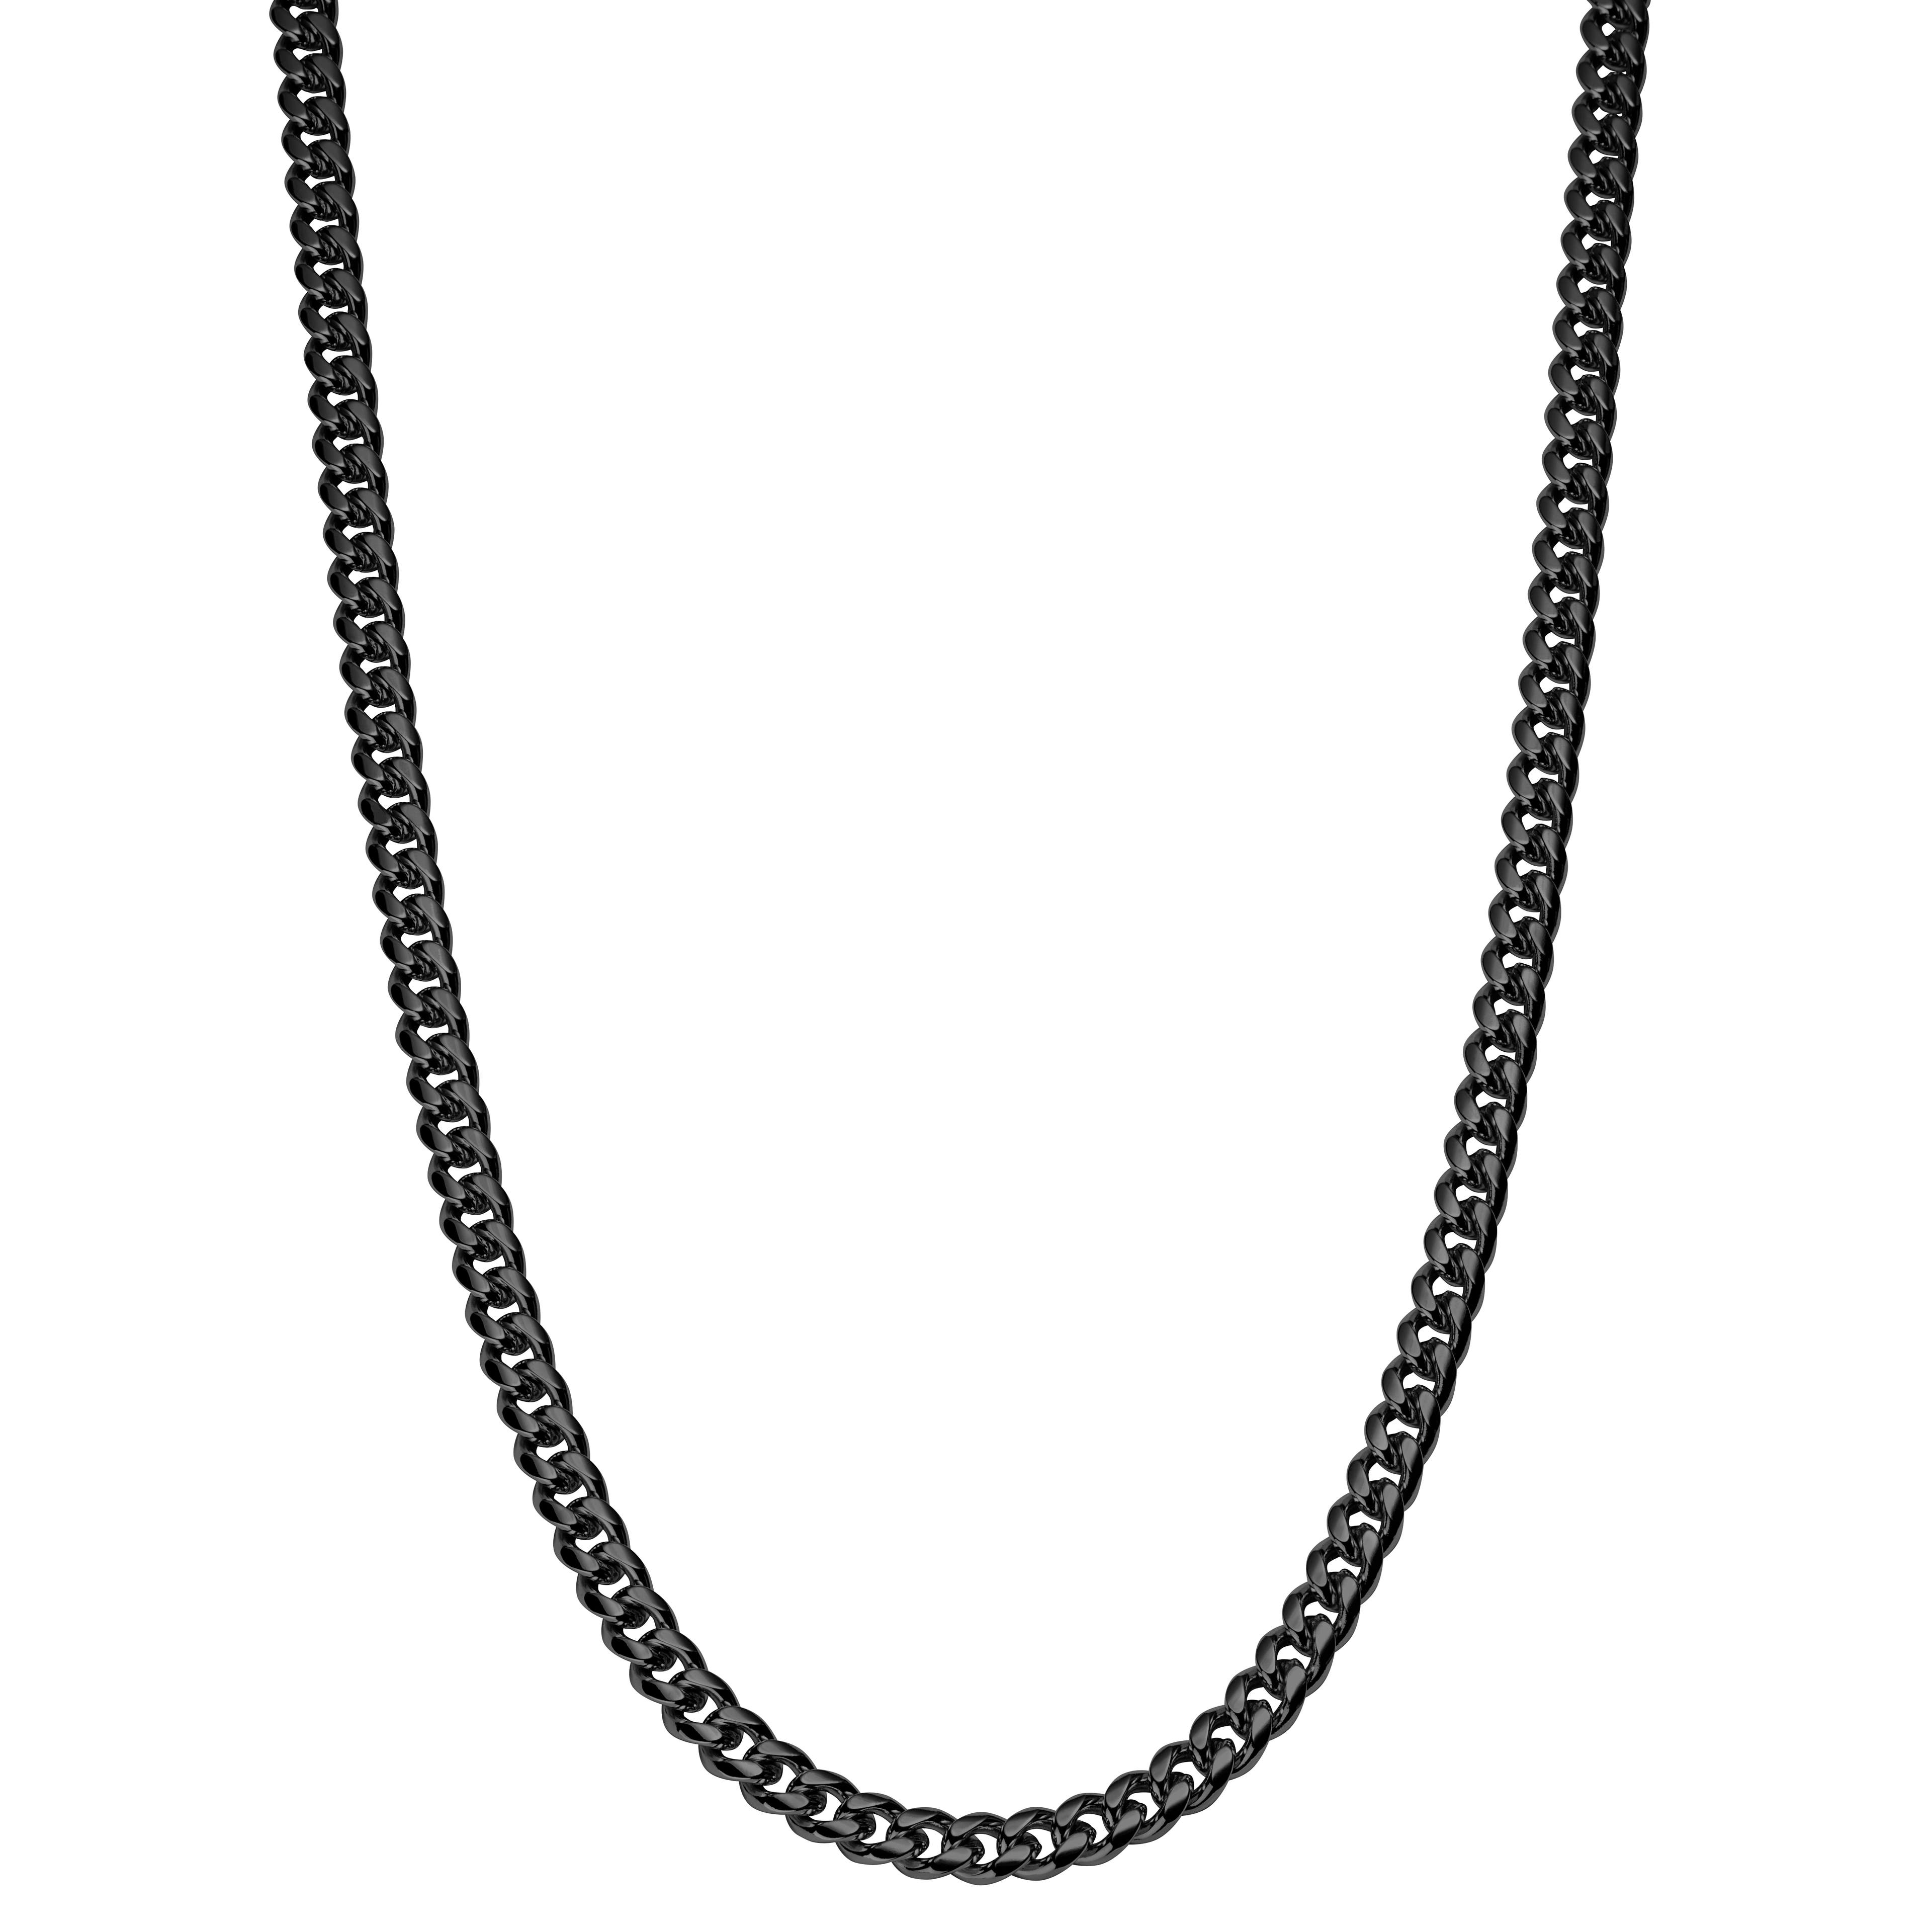 Black string necklace and oblong metal tag - knots